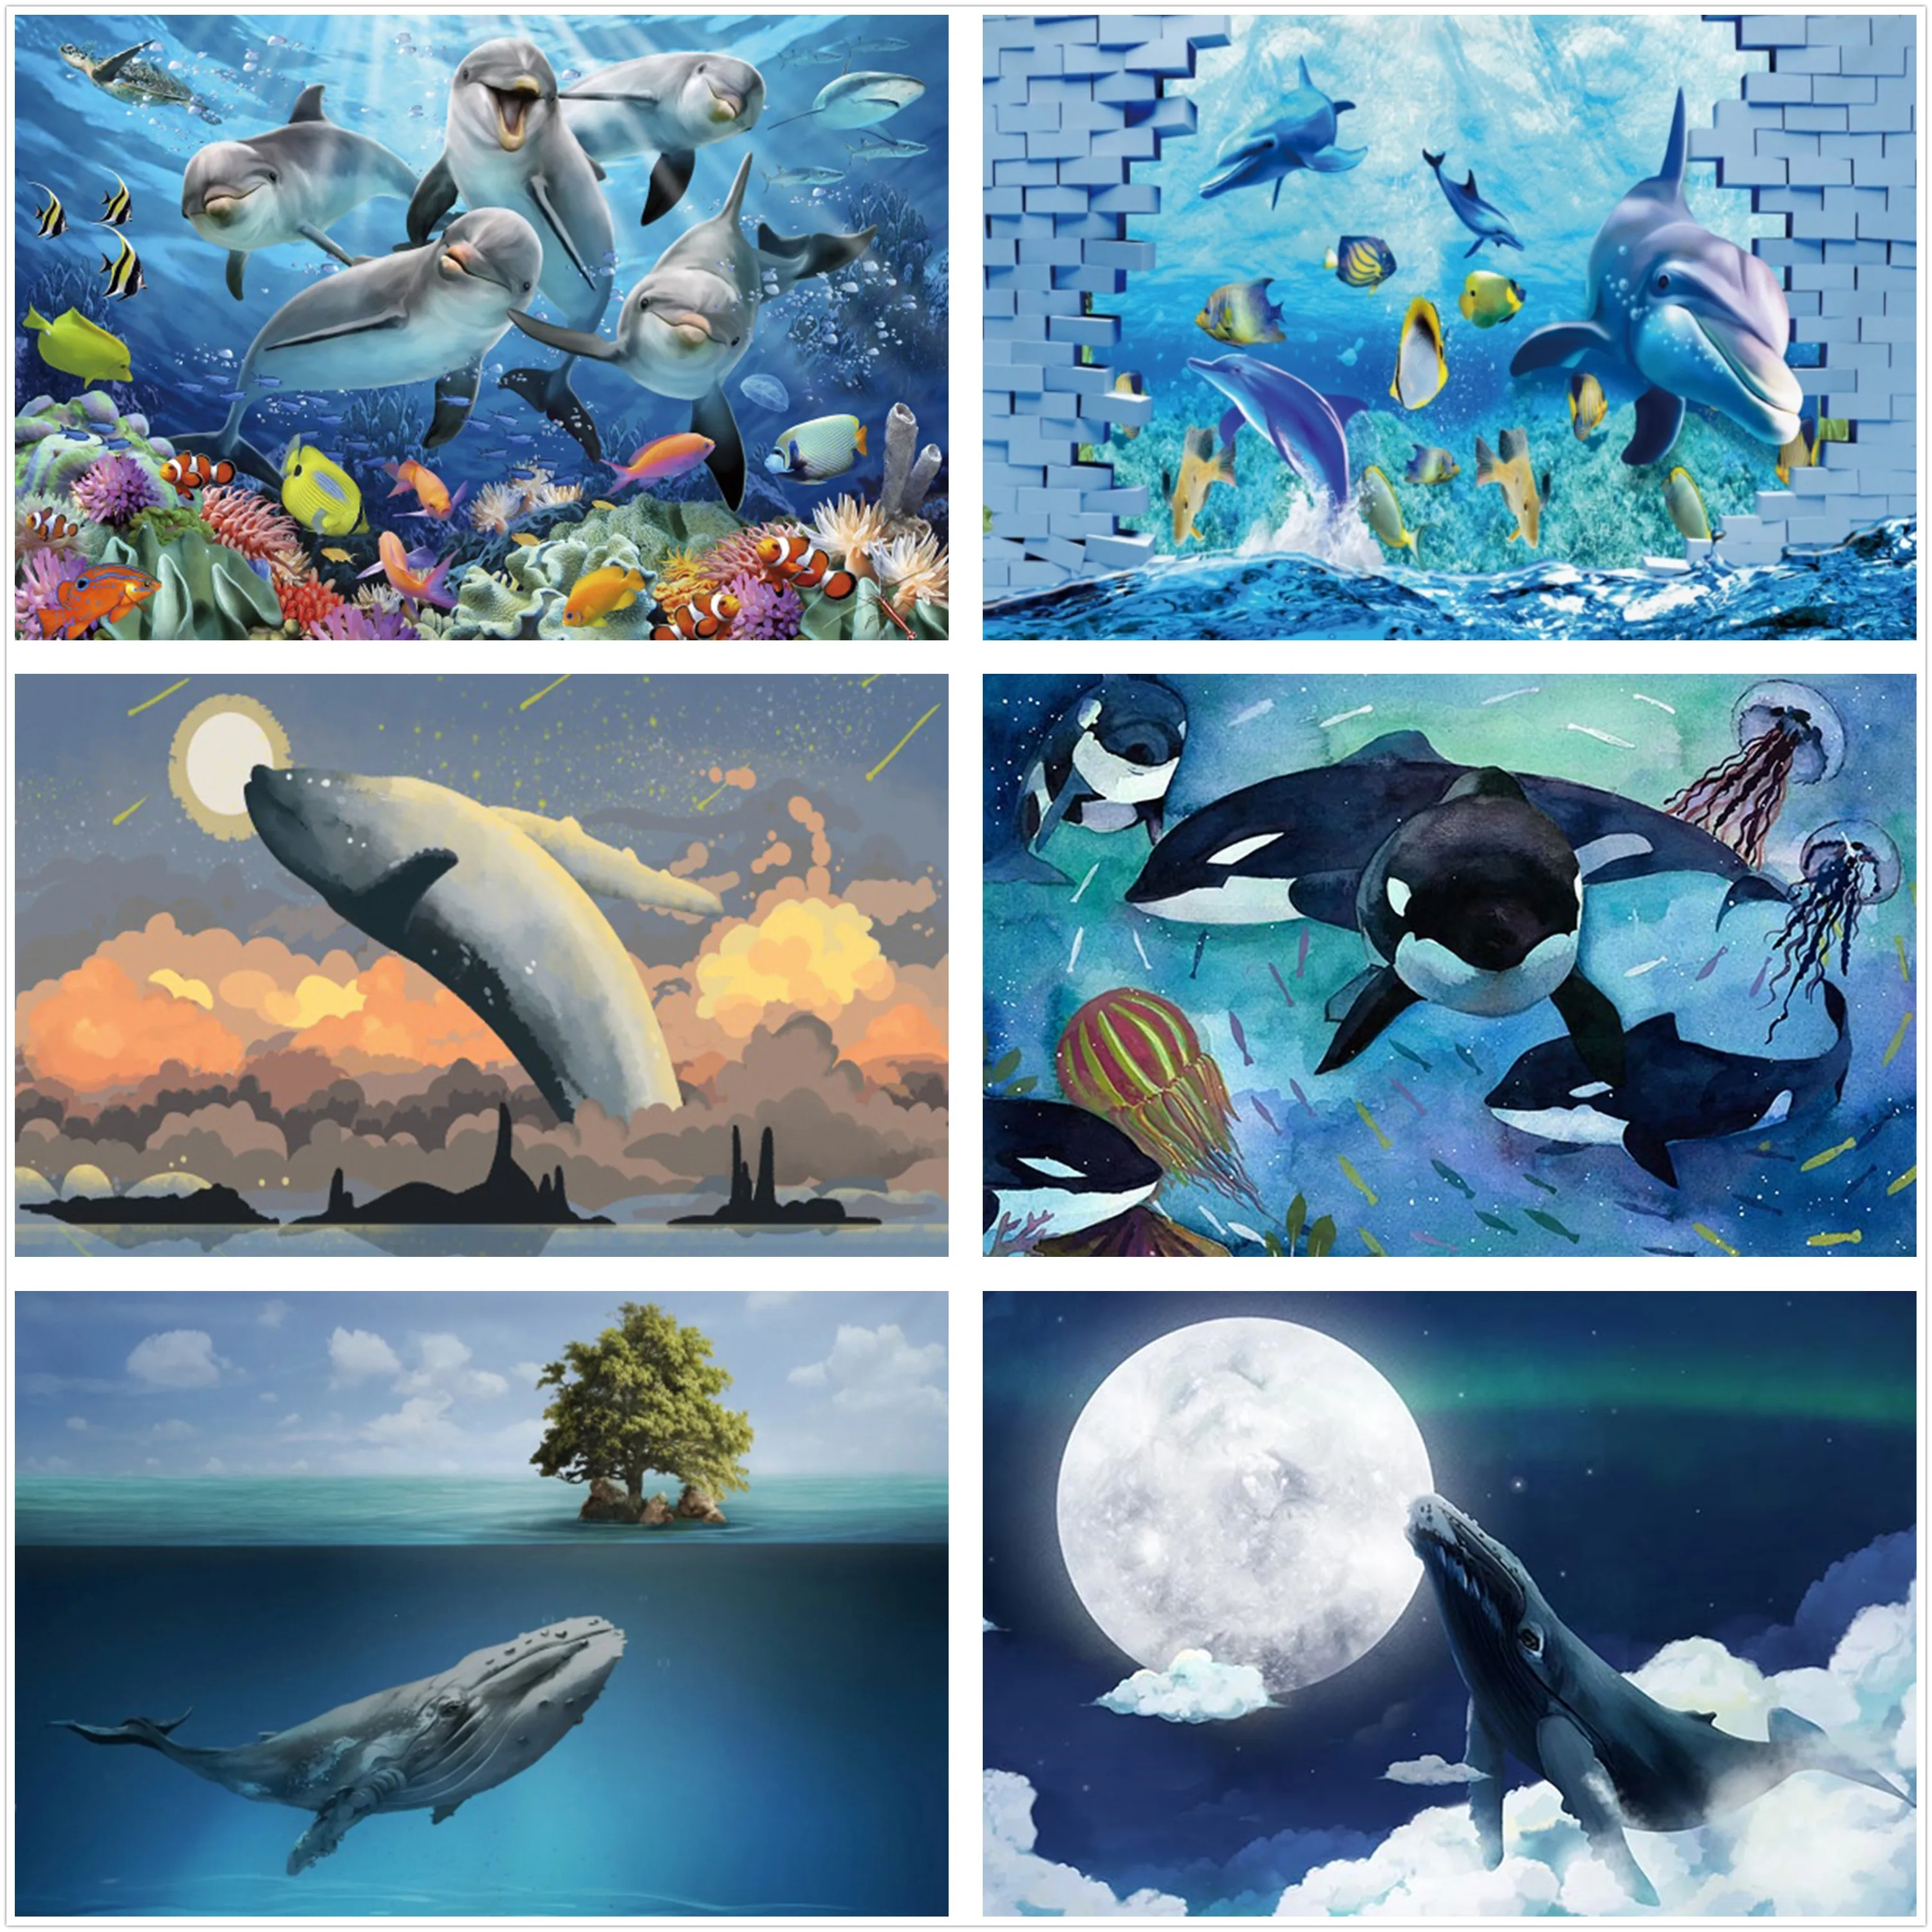 

Marine Animal Coral Underwater World Tapestry 3D Dolphin Fish Printed Wall Hanging Cloth Fashion Blue Ocean Home Decor Bed Mat